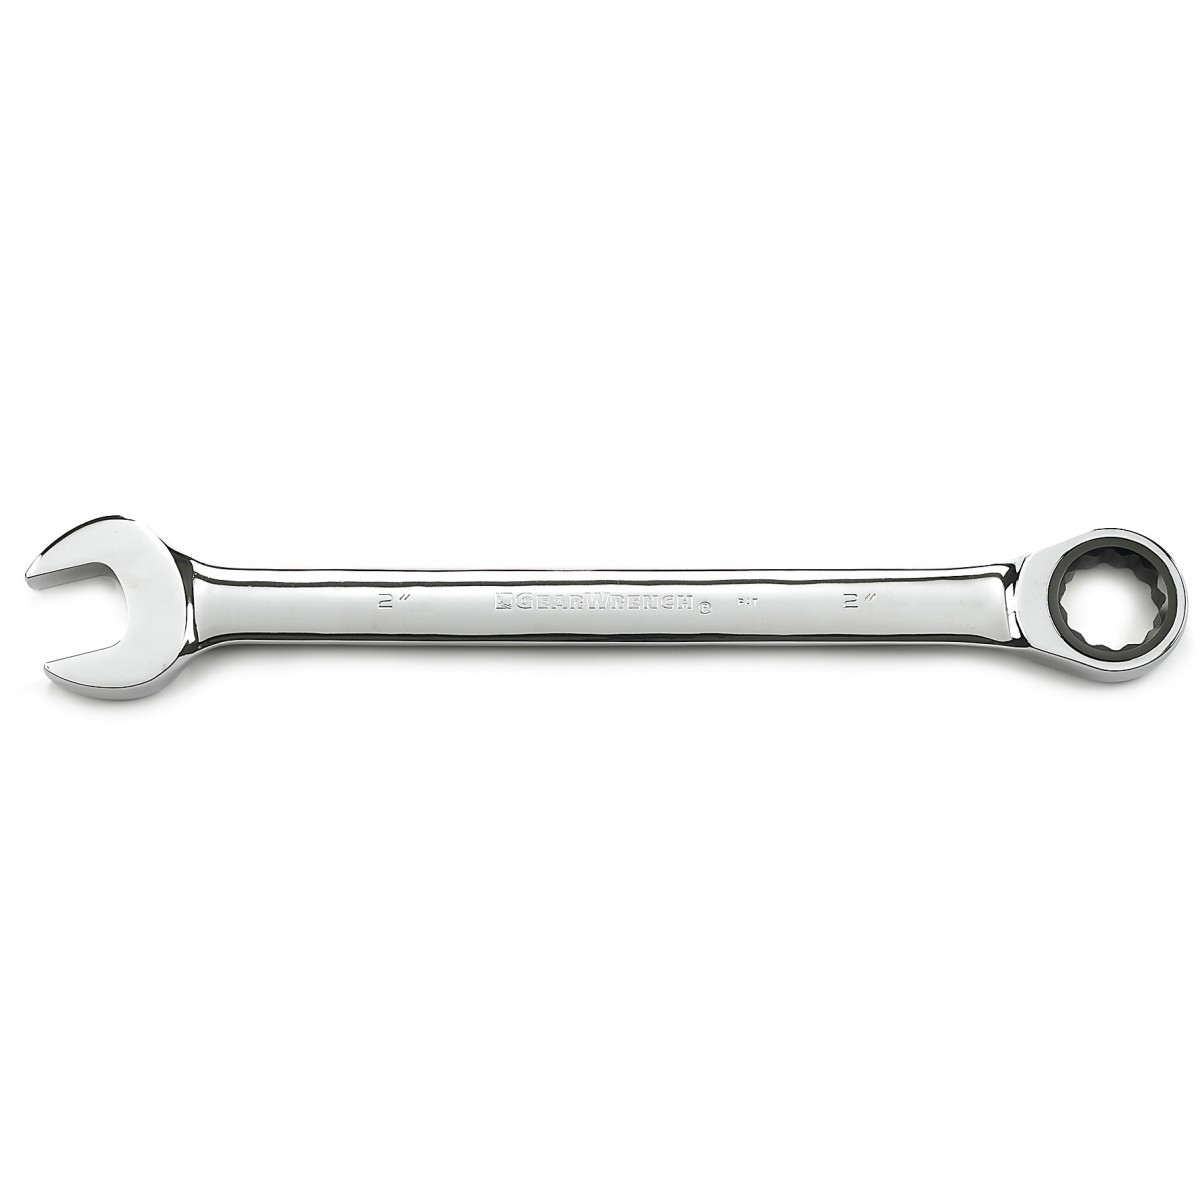 329-9060d 1.31 In. Comb Gear Wrench